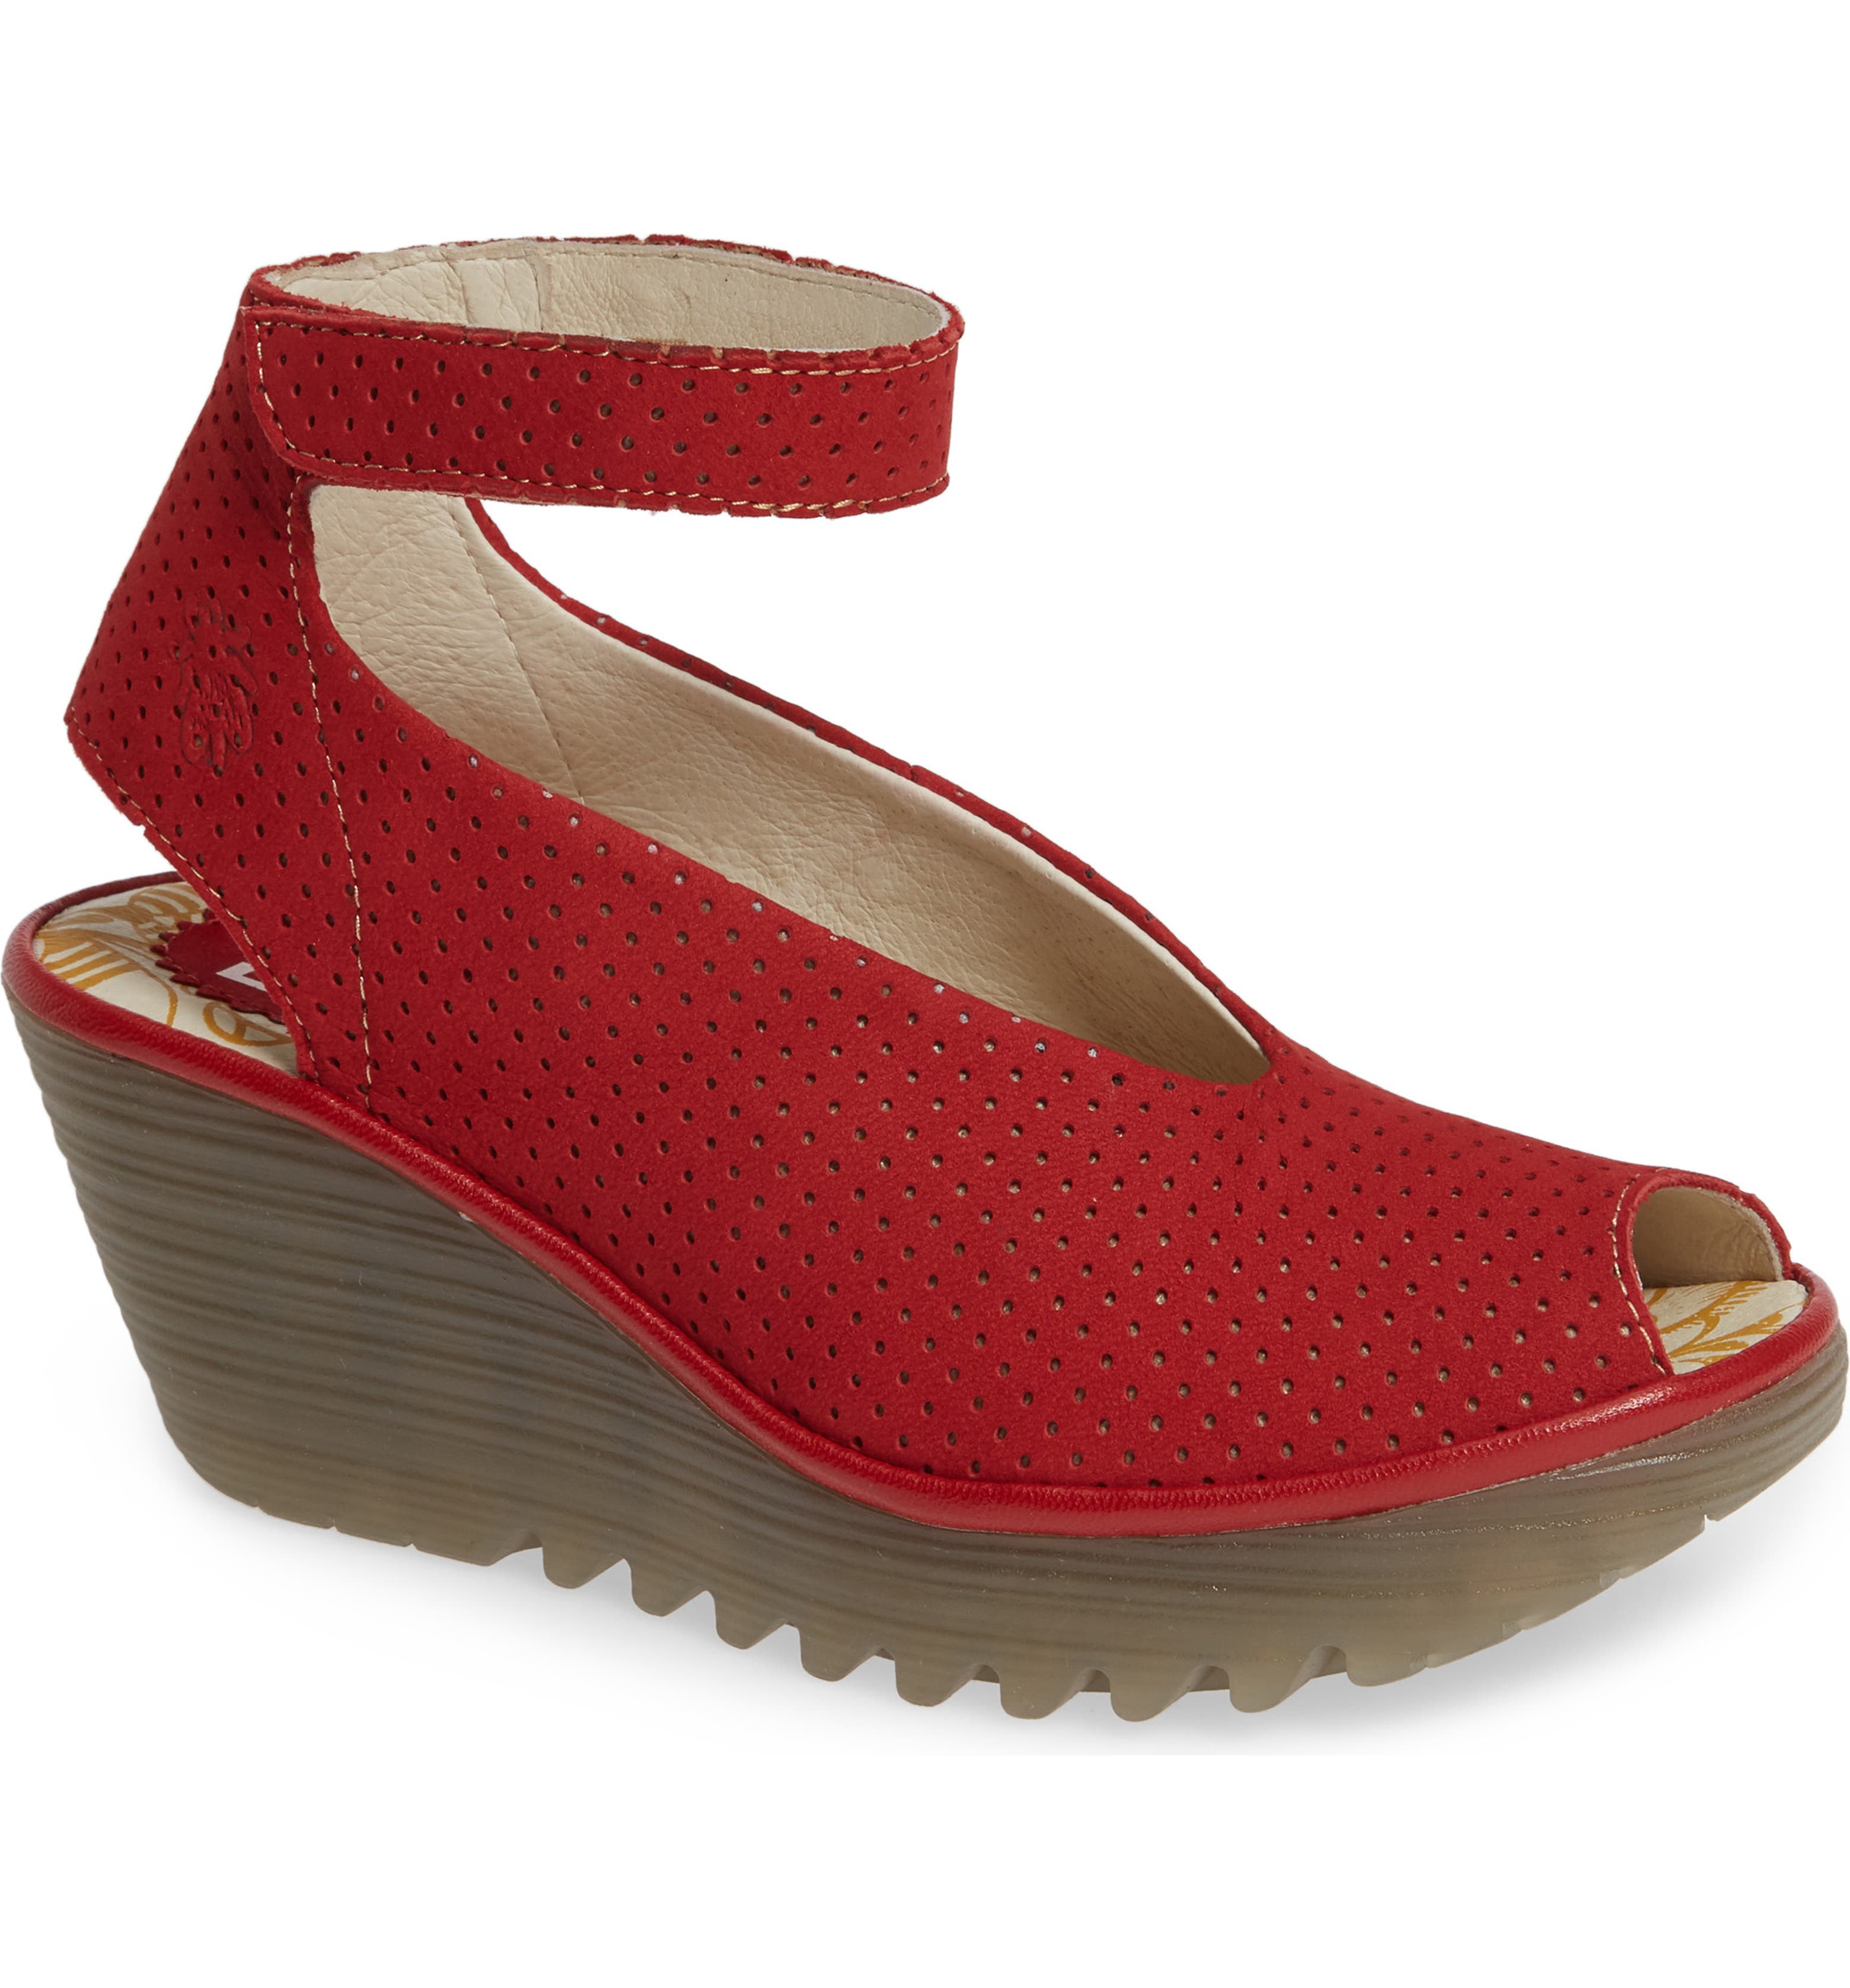 Fly London 'Yala' Perforated Leather Sandal | Nordstrom